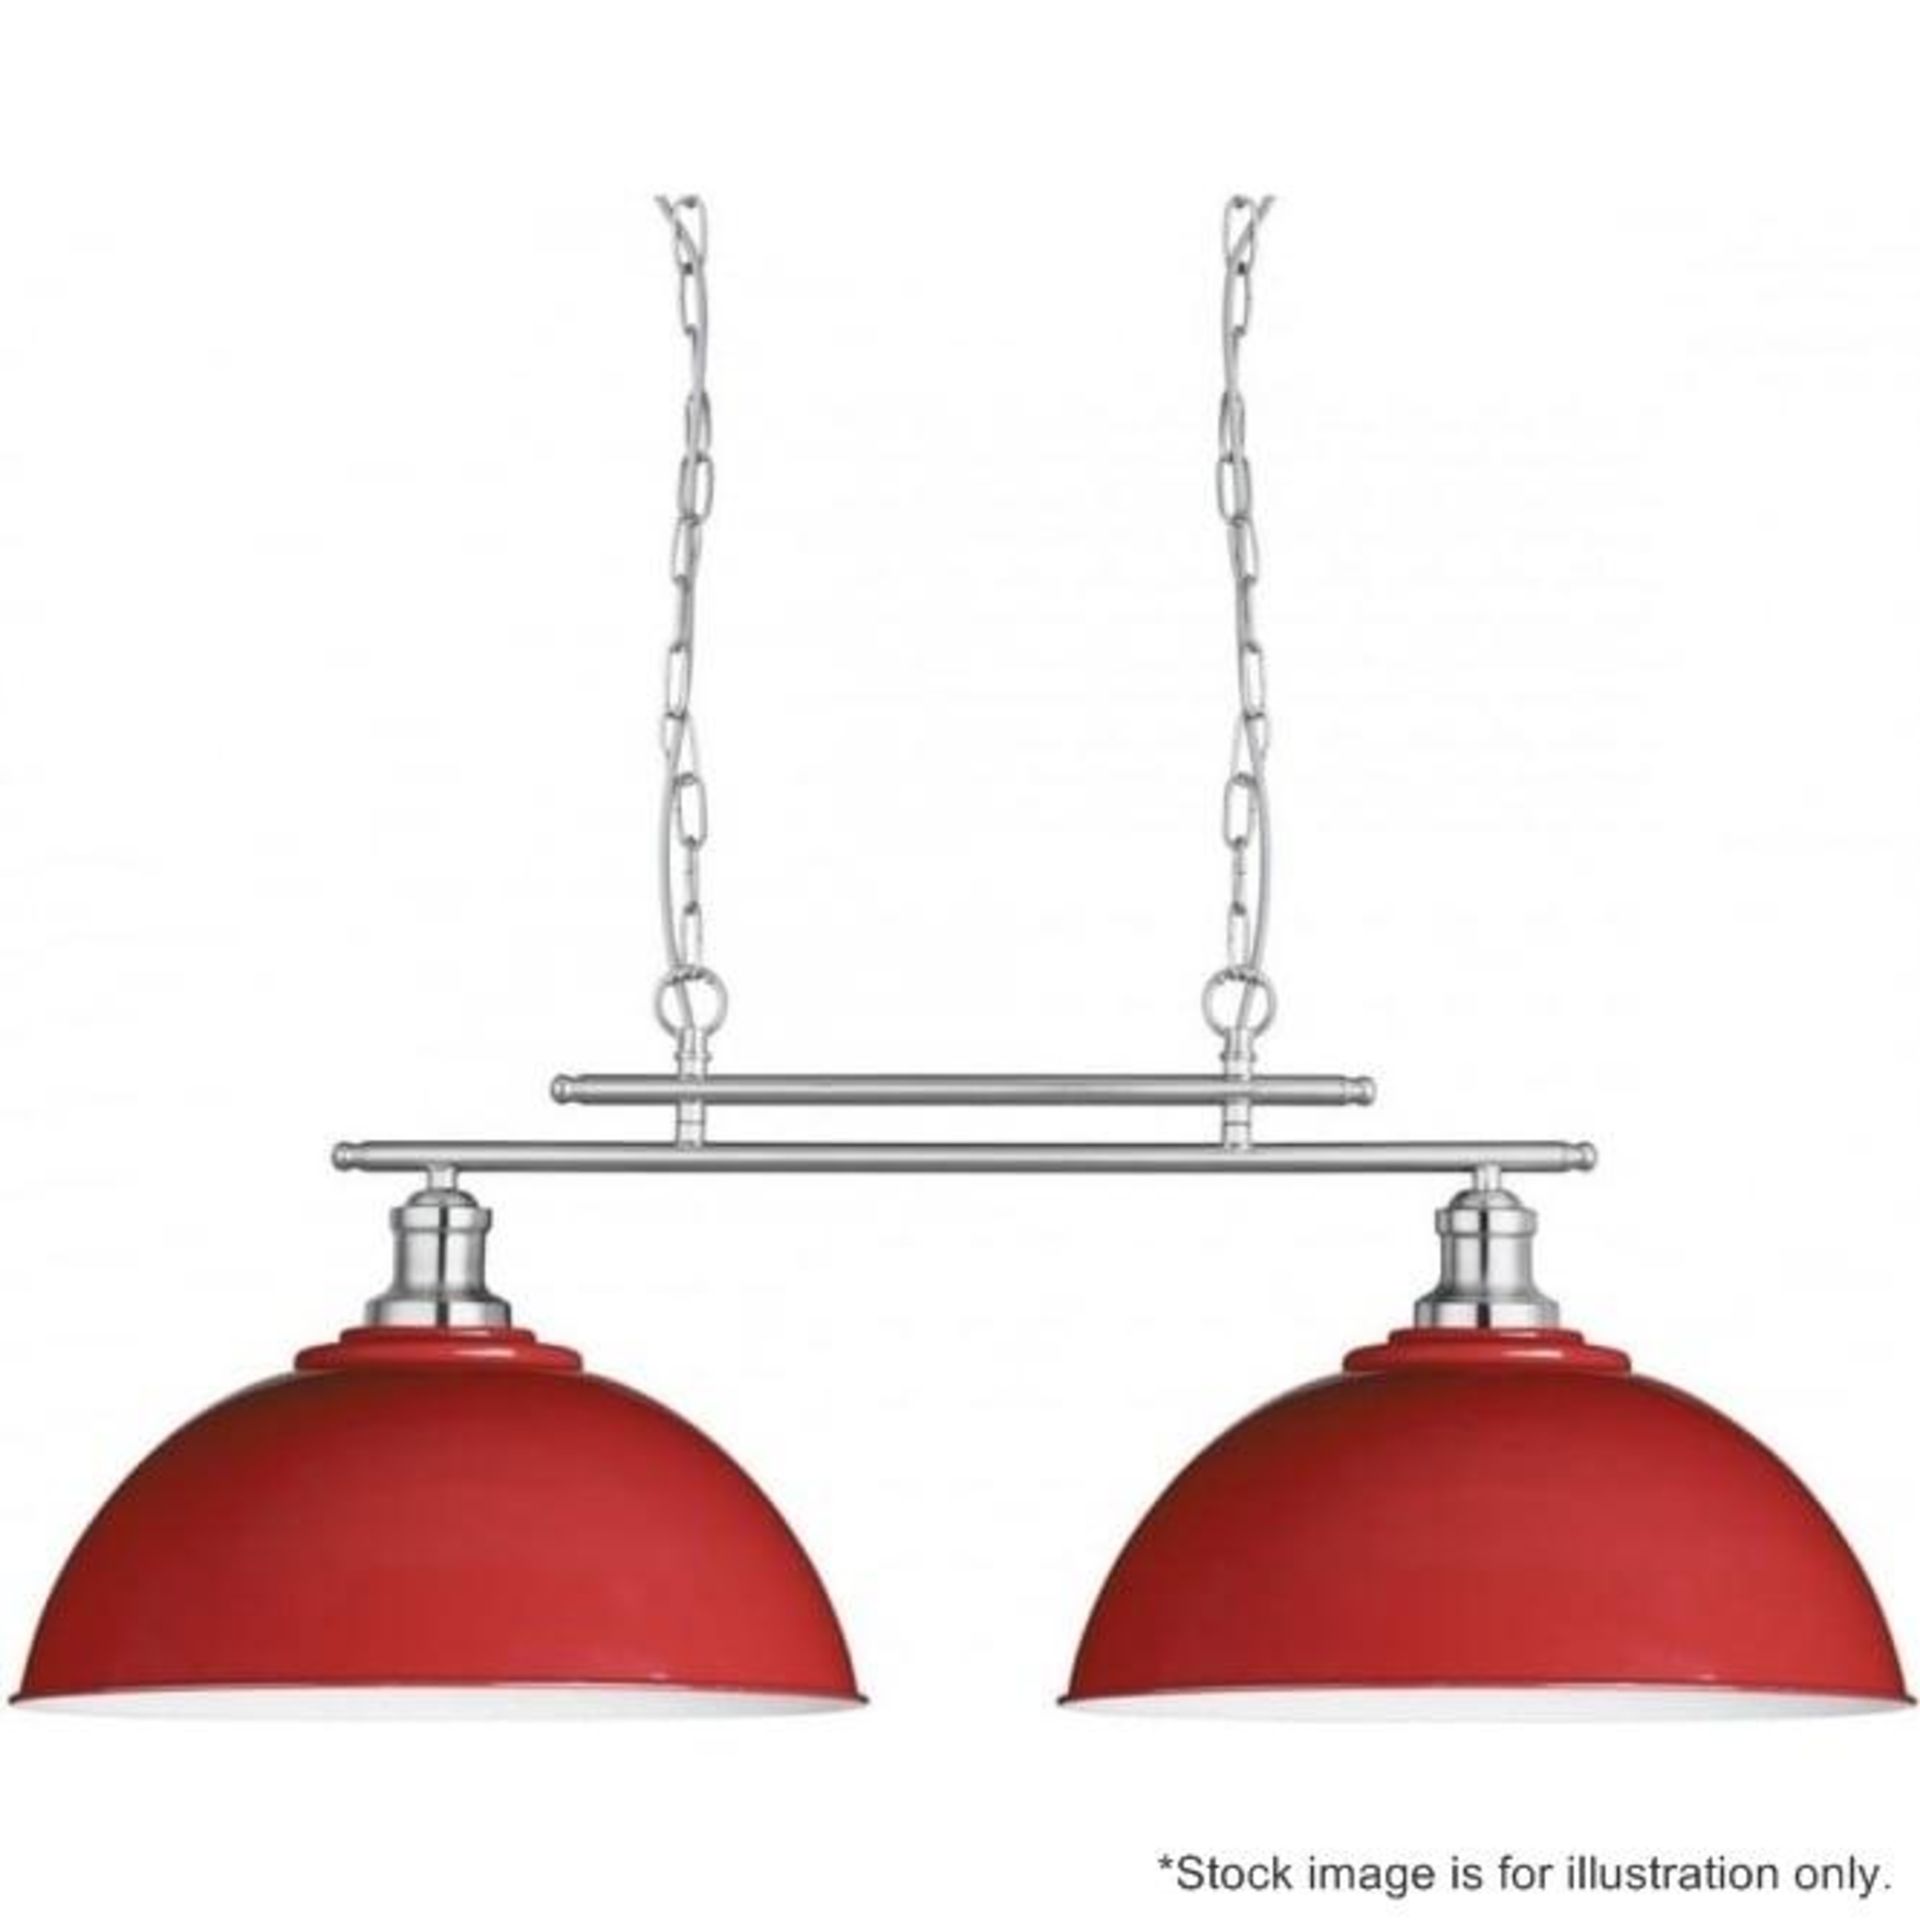 1 x Fusion Satin Silver 2-Light Ceiling Bar Light With Red Shades - New Boxed Stock - CL323 - Ref: 0 - Image 3 of 3